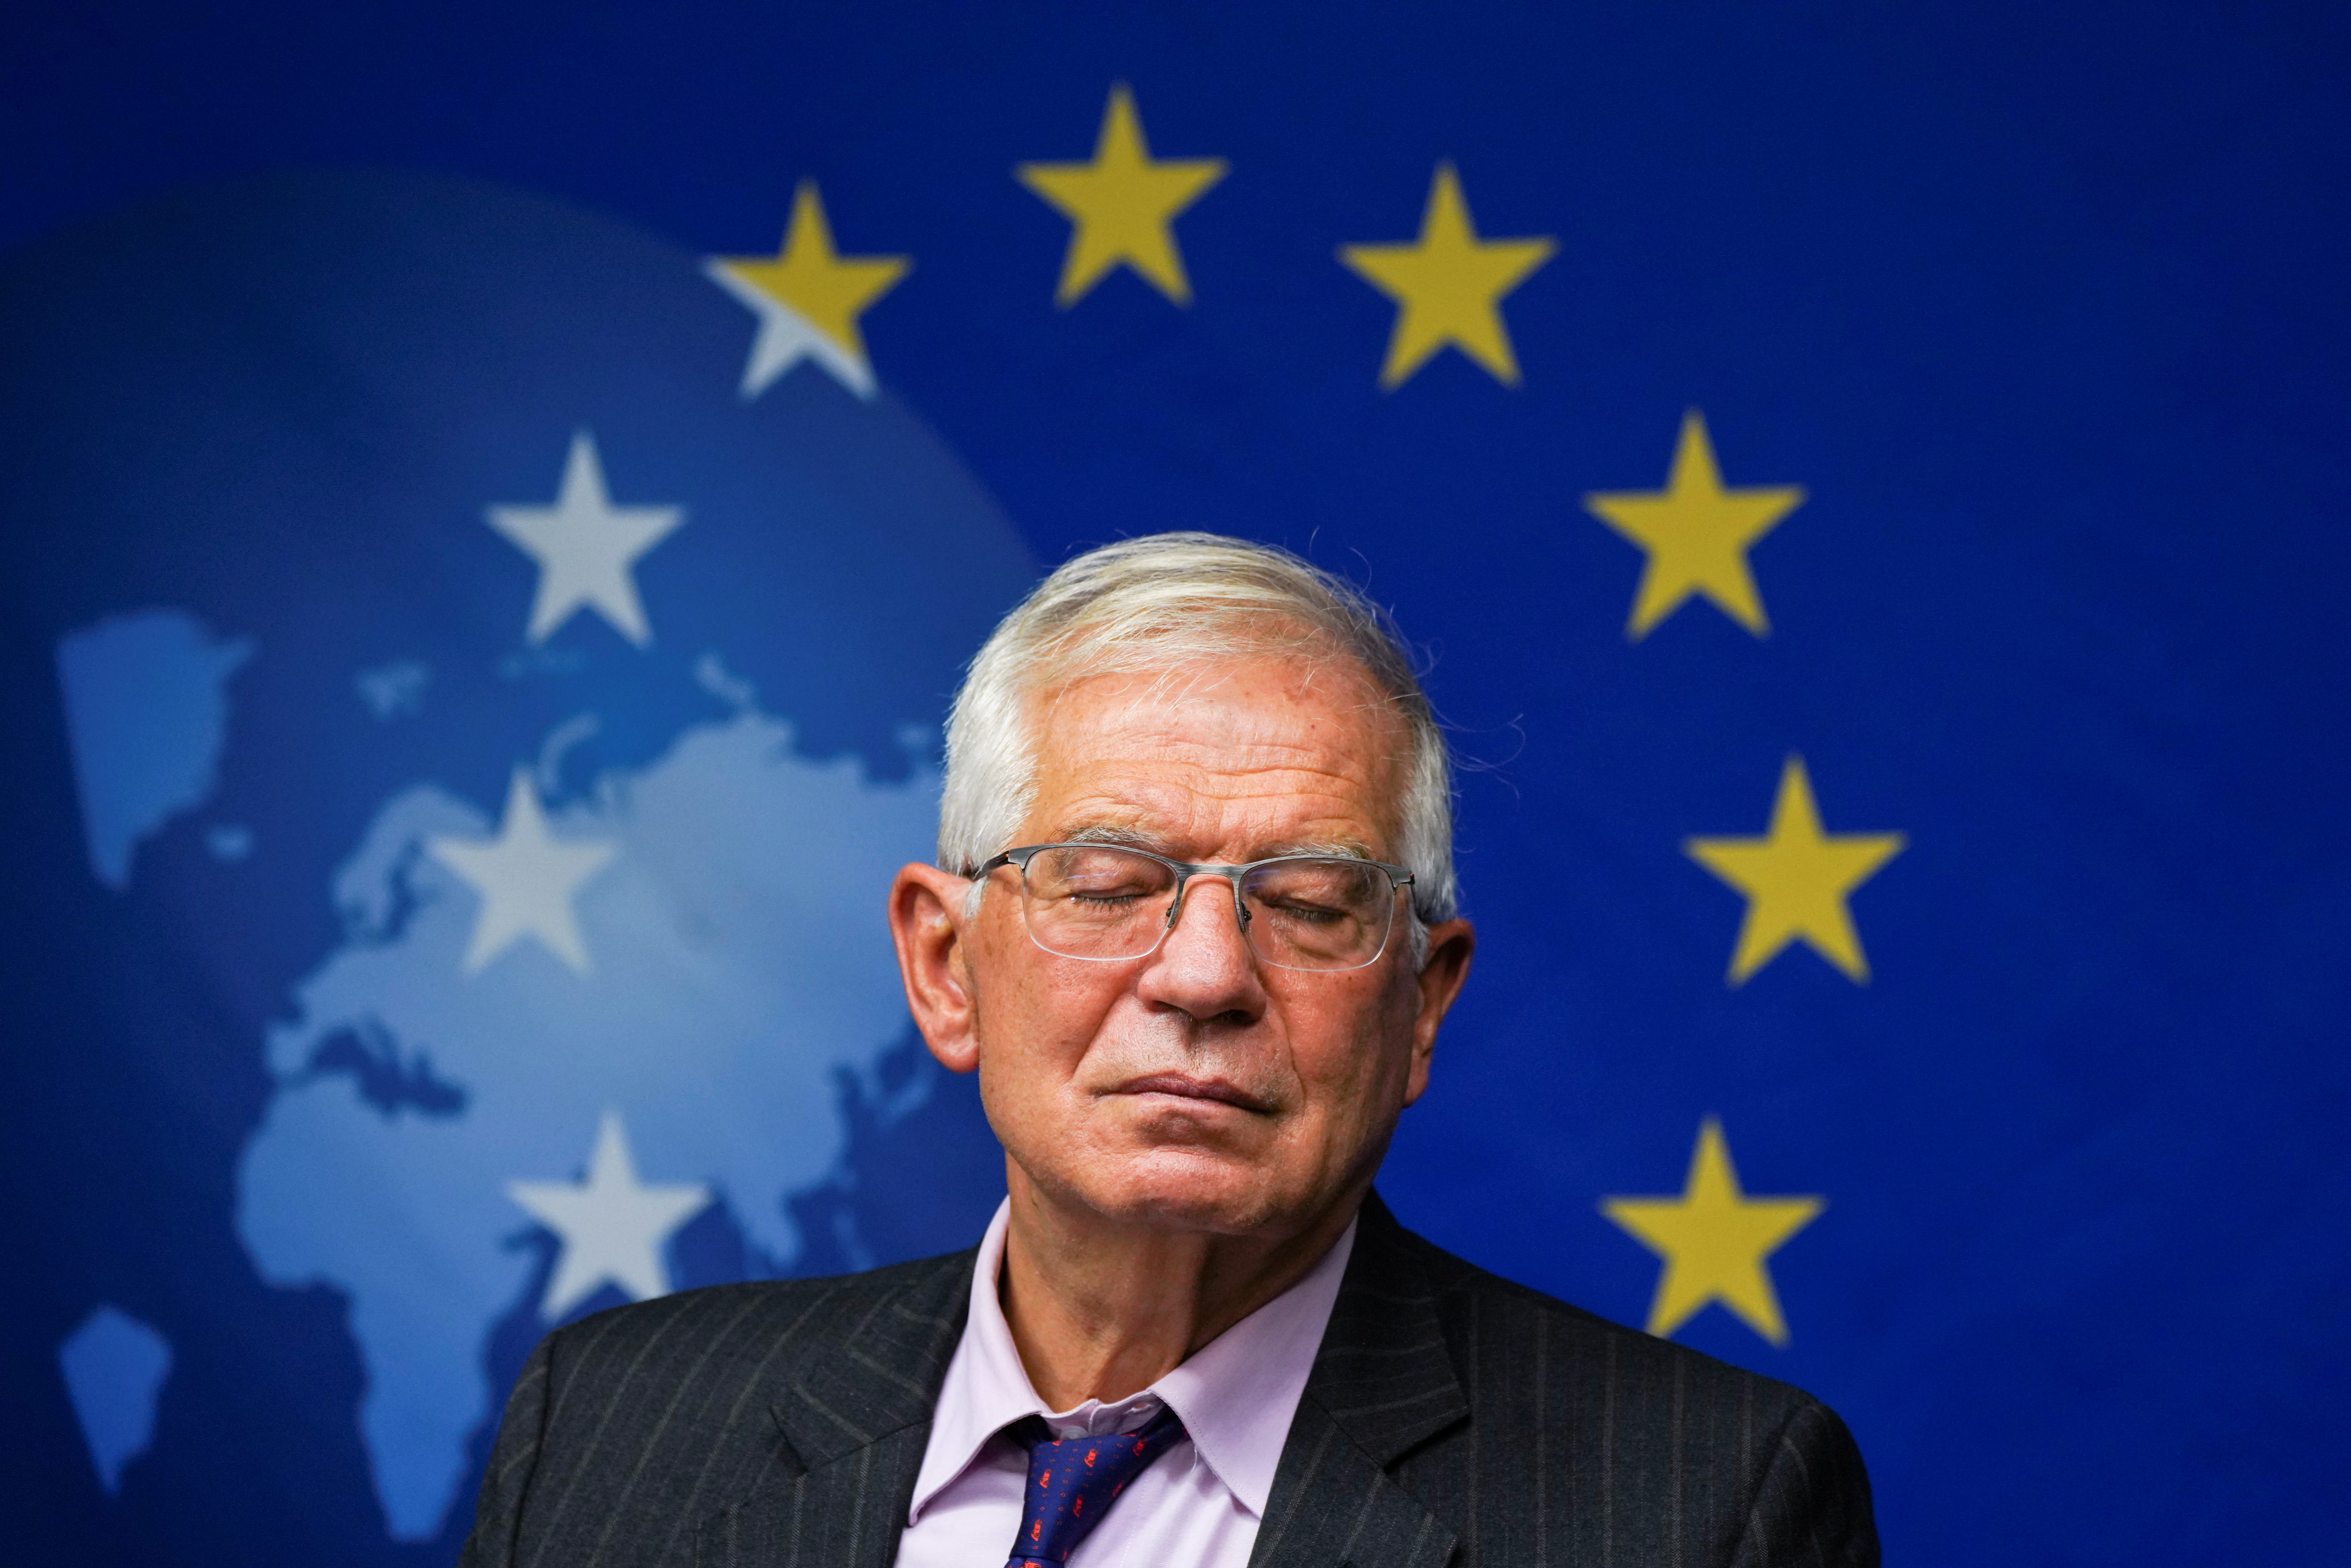 Josep Borrell holds a press conference after a meeting of a meeting of E.U. Foreign Ministers in New York